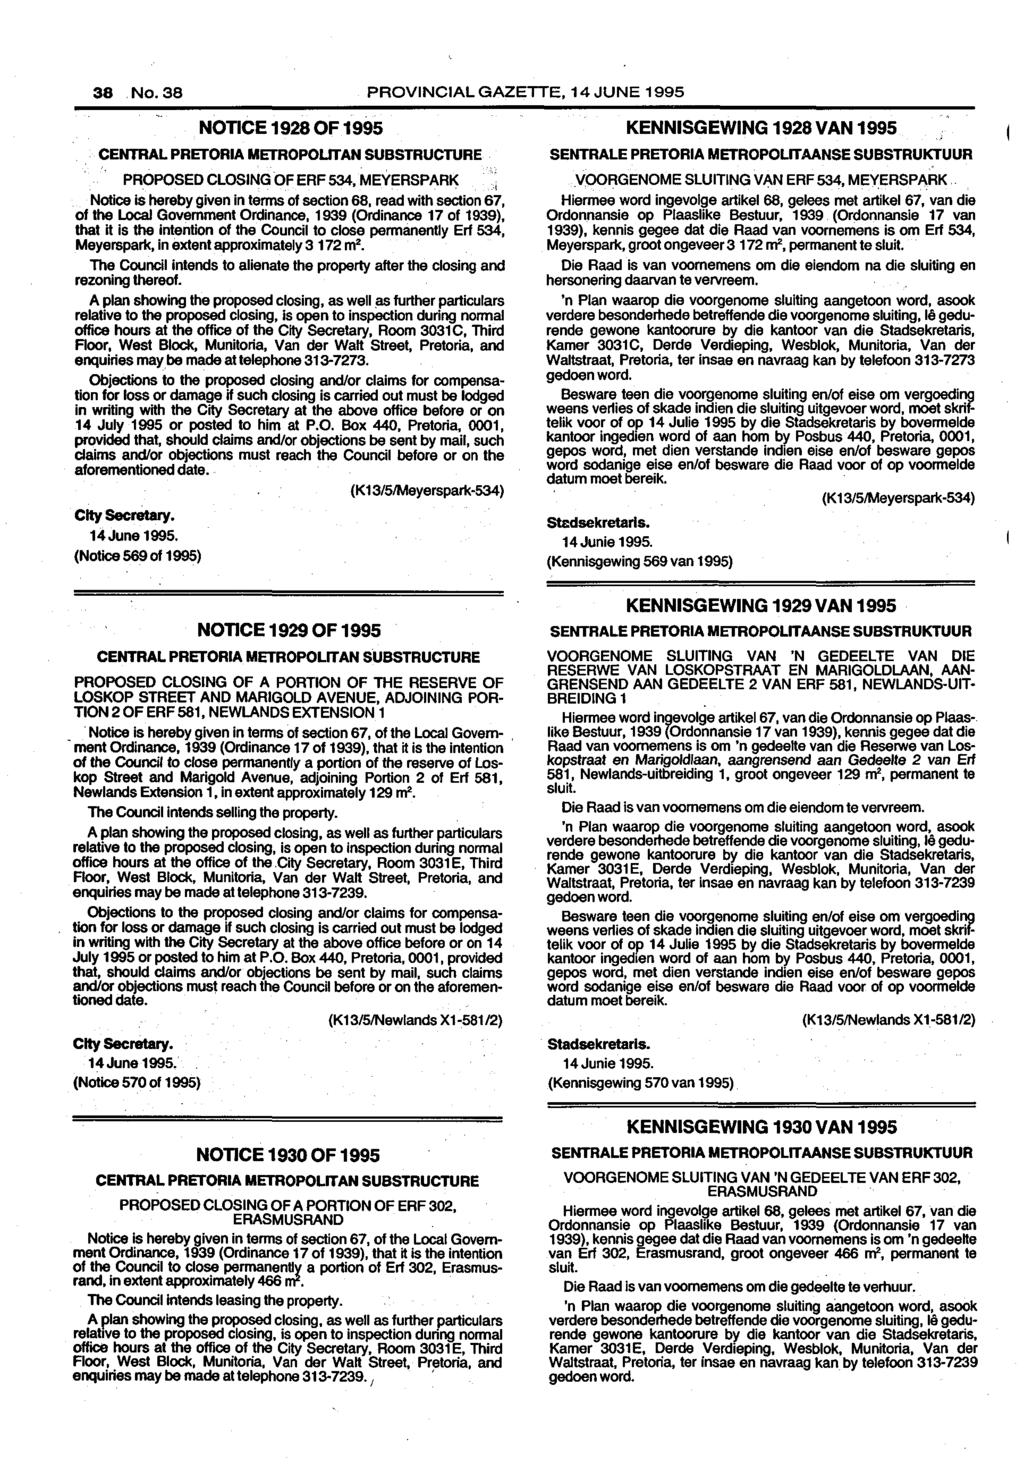 PROVINCIAL GAZETTE, 14 JUNE 1995 NOTICE 1928 OF 1995 CENTRAL PRETORIA METROPOUTAN SUBSTRUCTURE PROPOSED CLOSING OF ERF 534, MEYERSPARK I Notice is hereby given in terms of section 68, read with